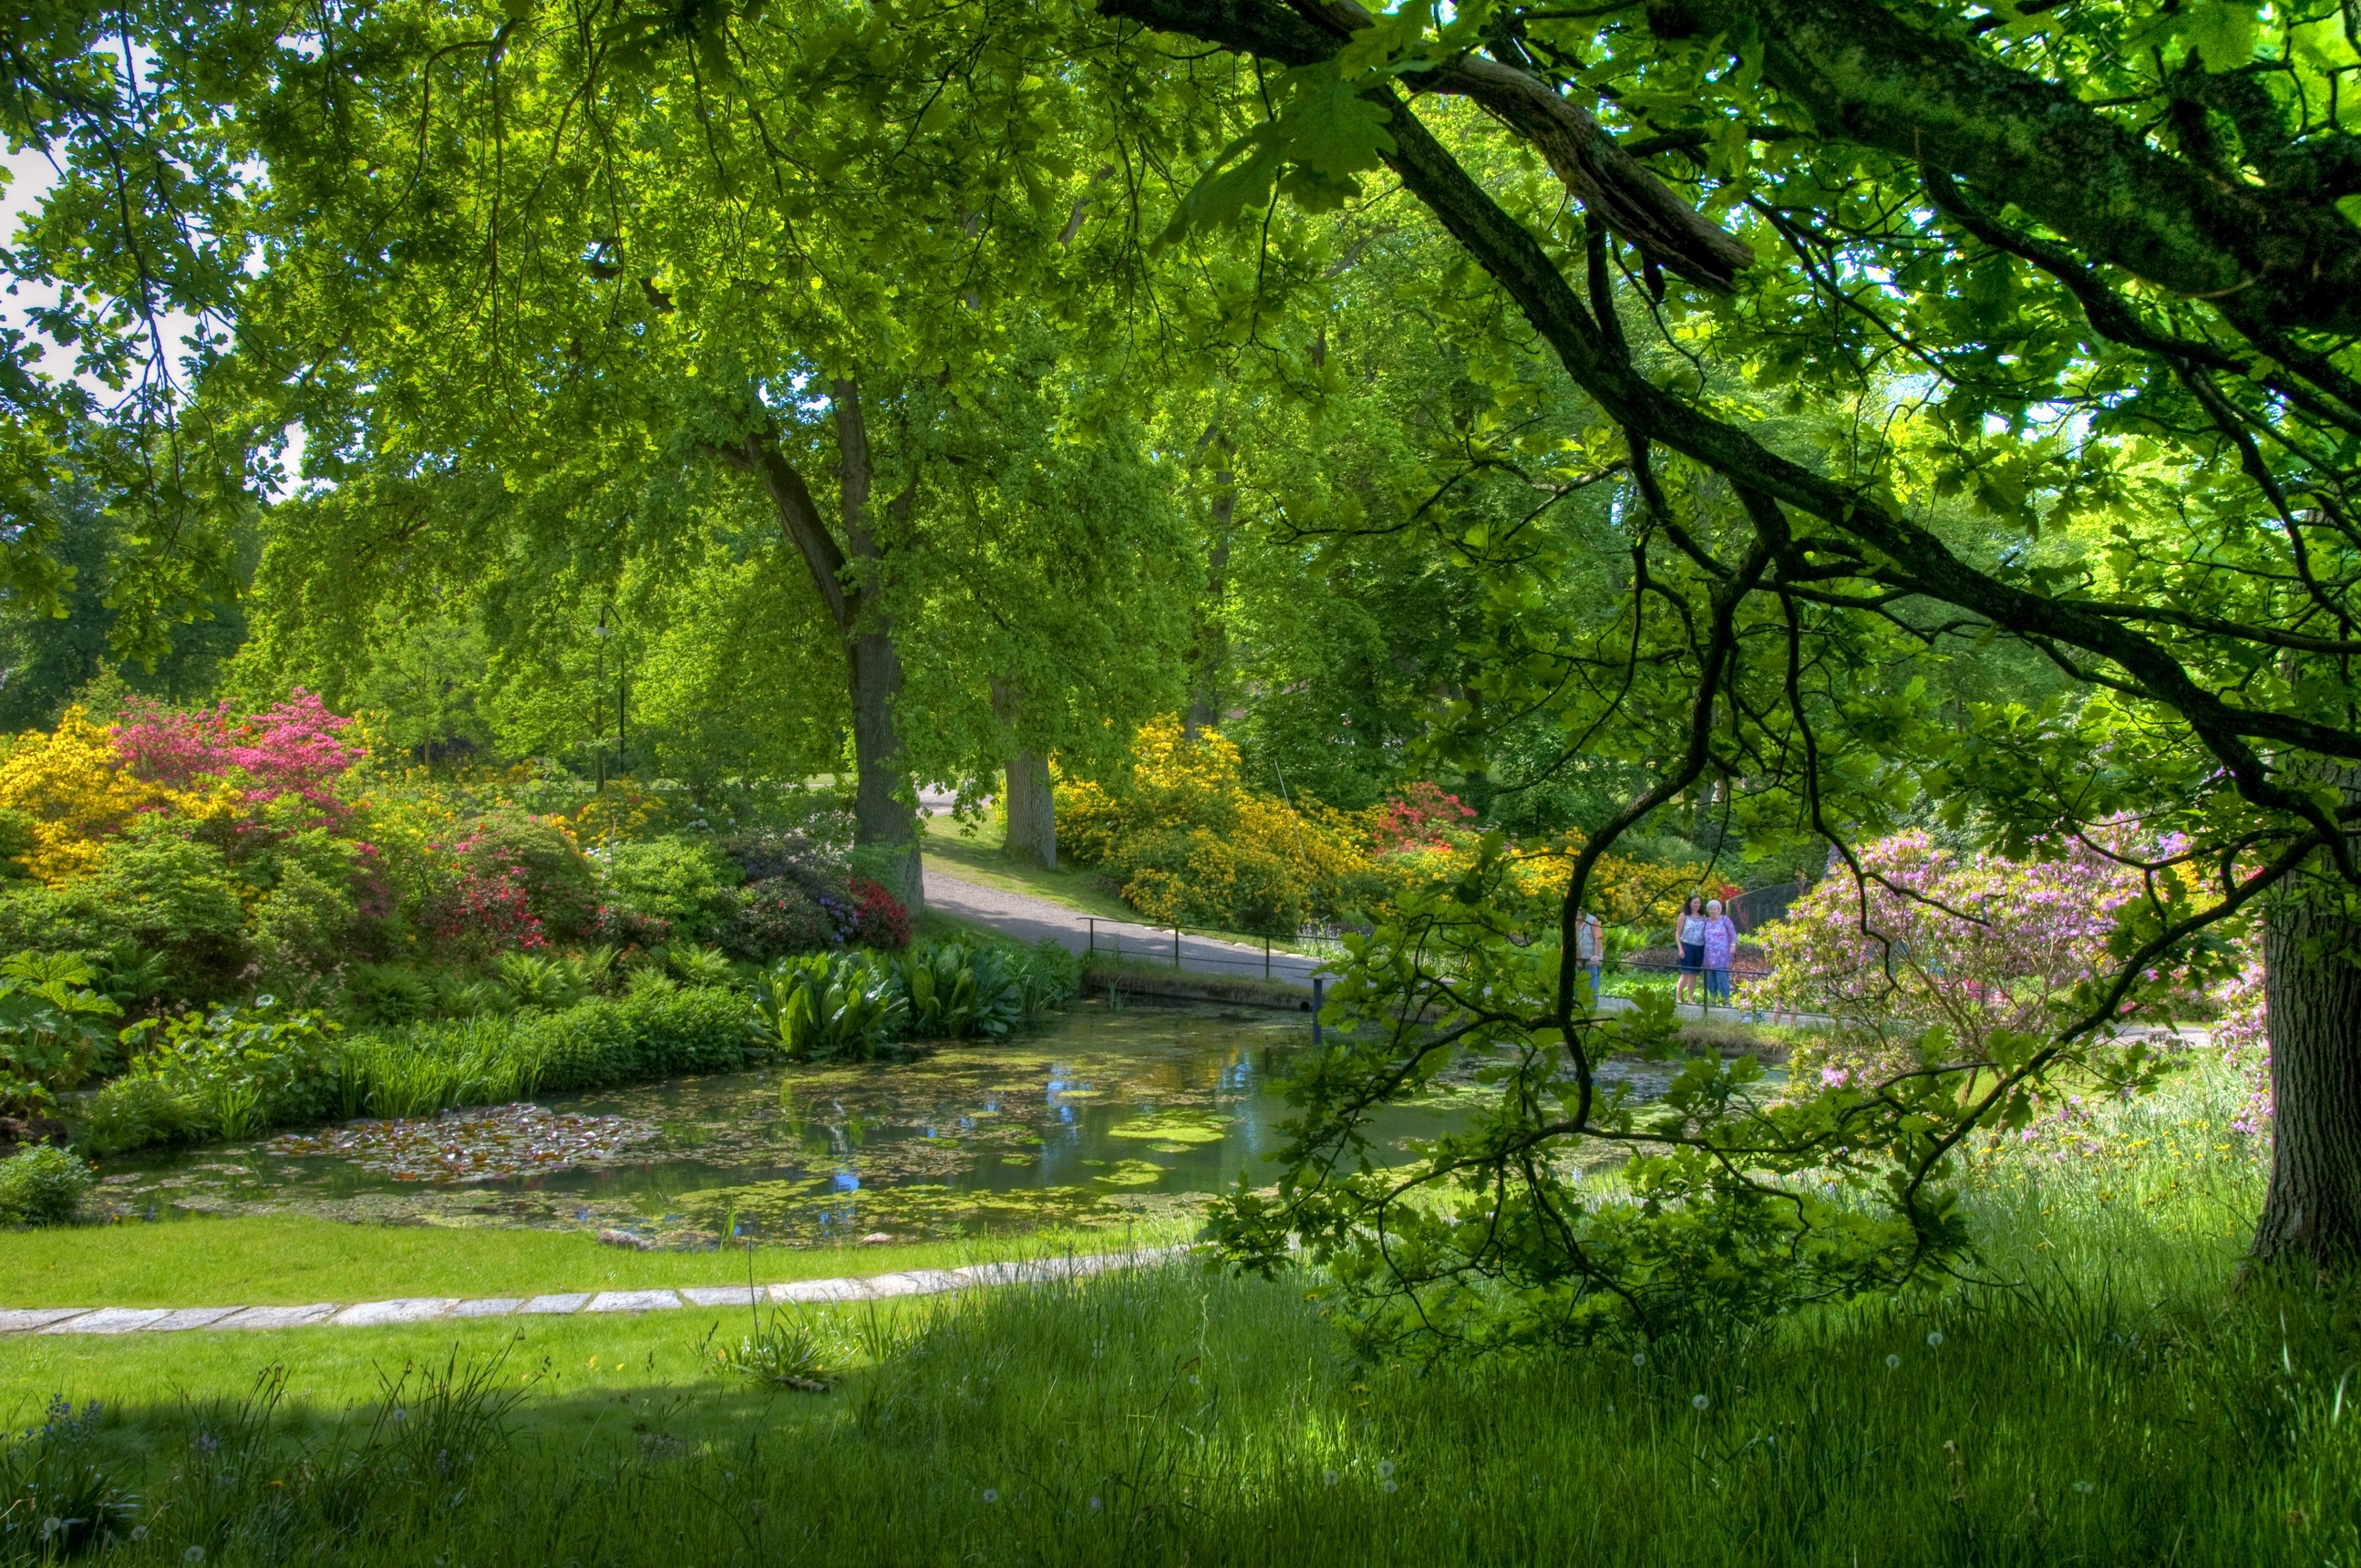 garden, green, people, nature, trees, pond, serenity